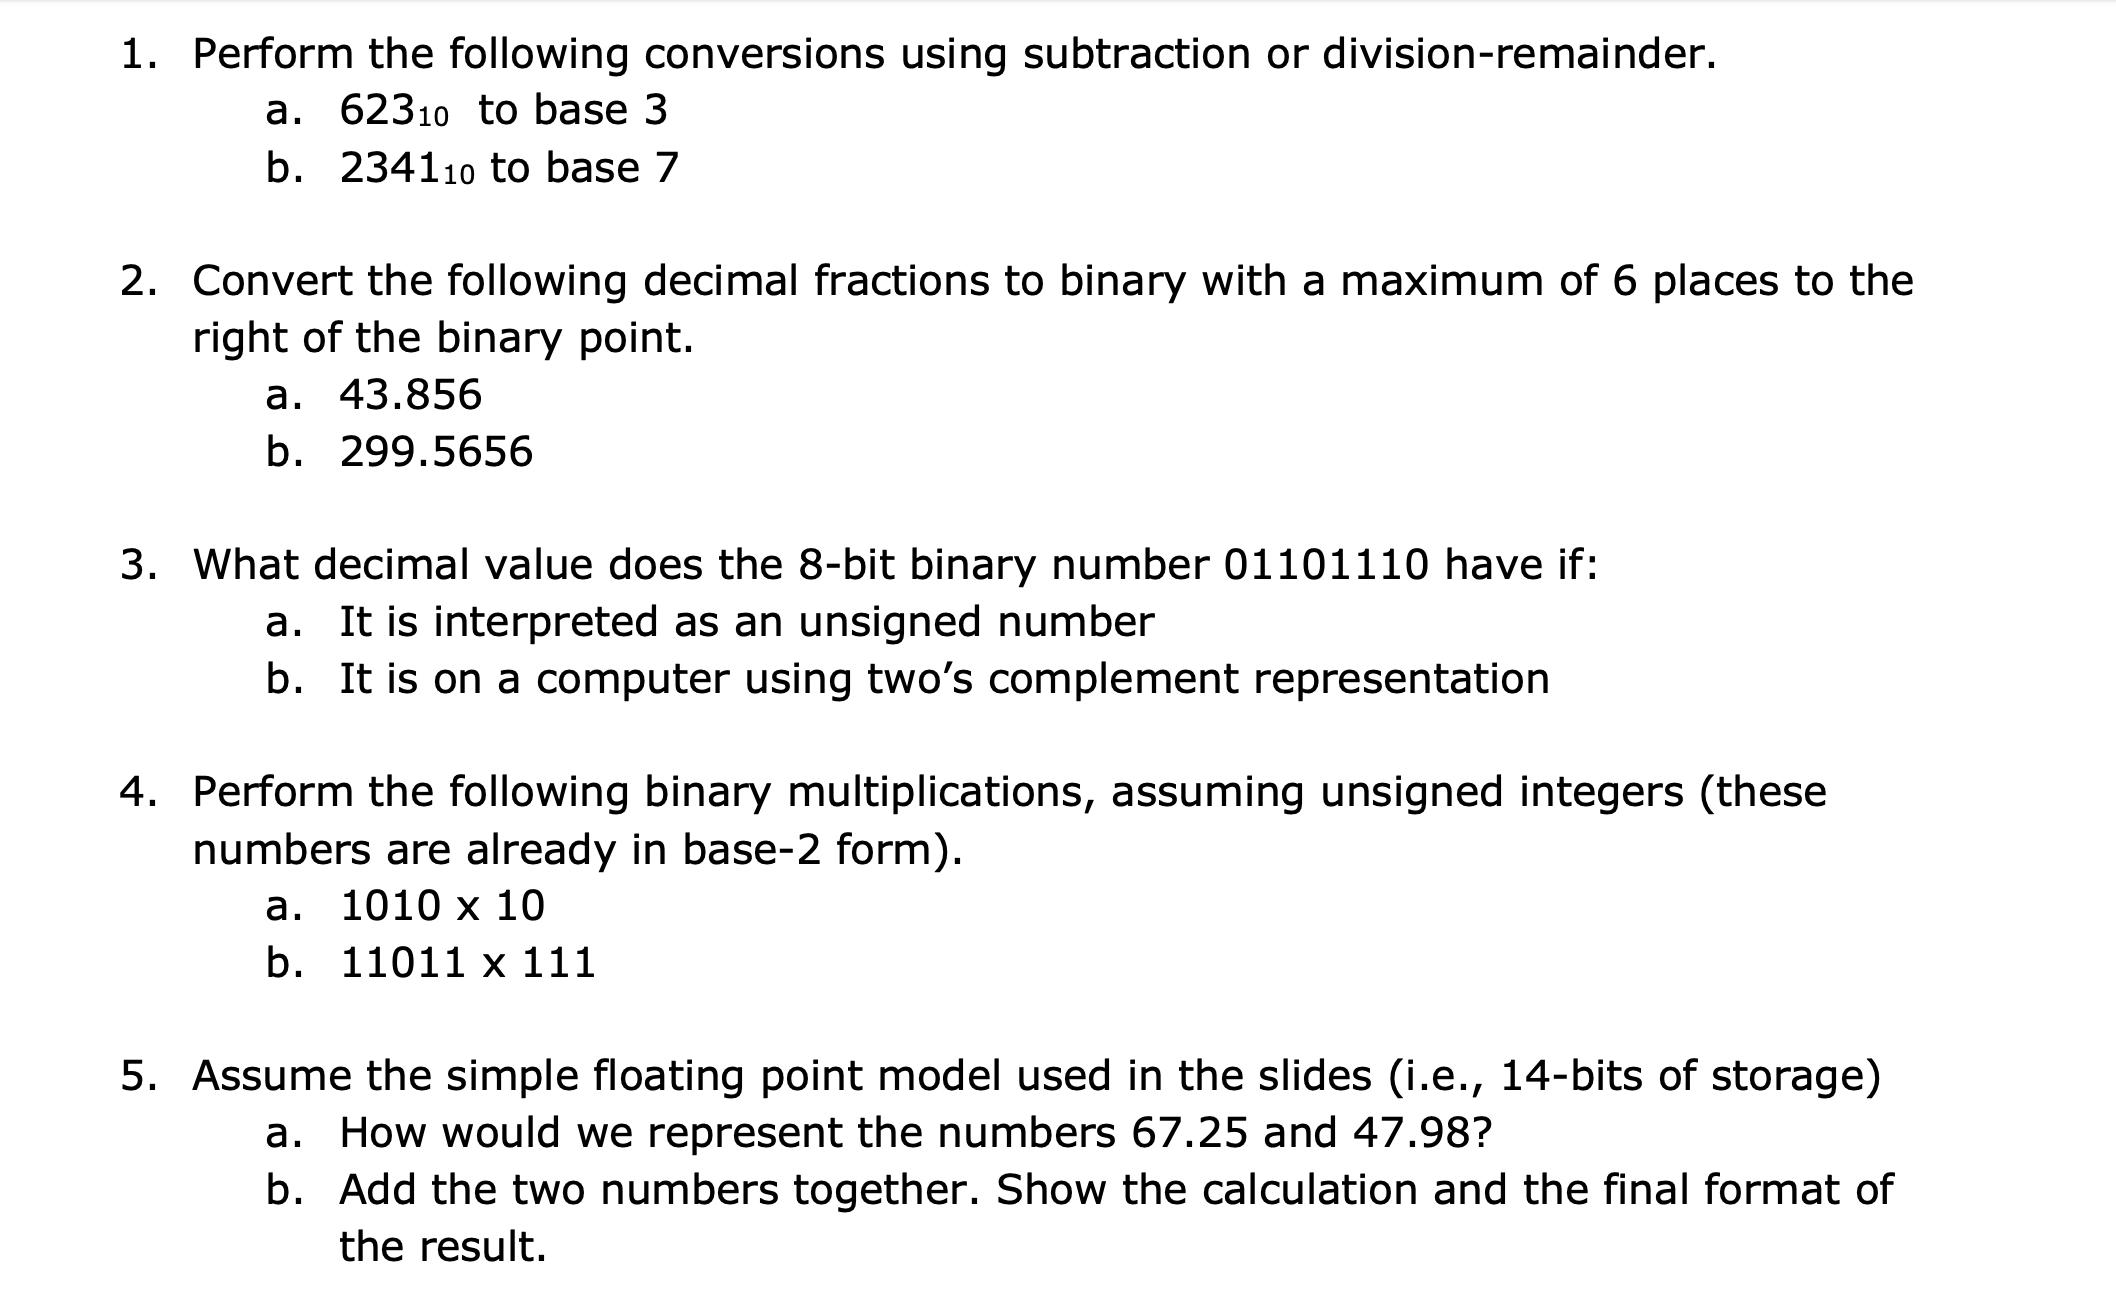 1. Perform the following conversions using subtraction or division-remainder. a. 62310 to base 3 b. 234110 to